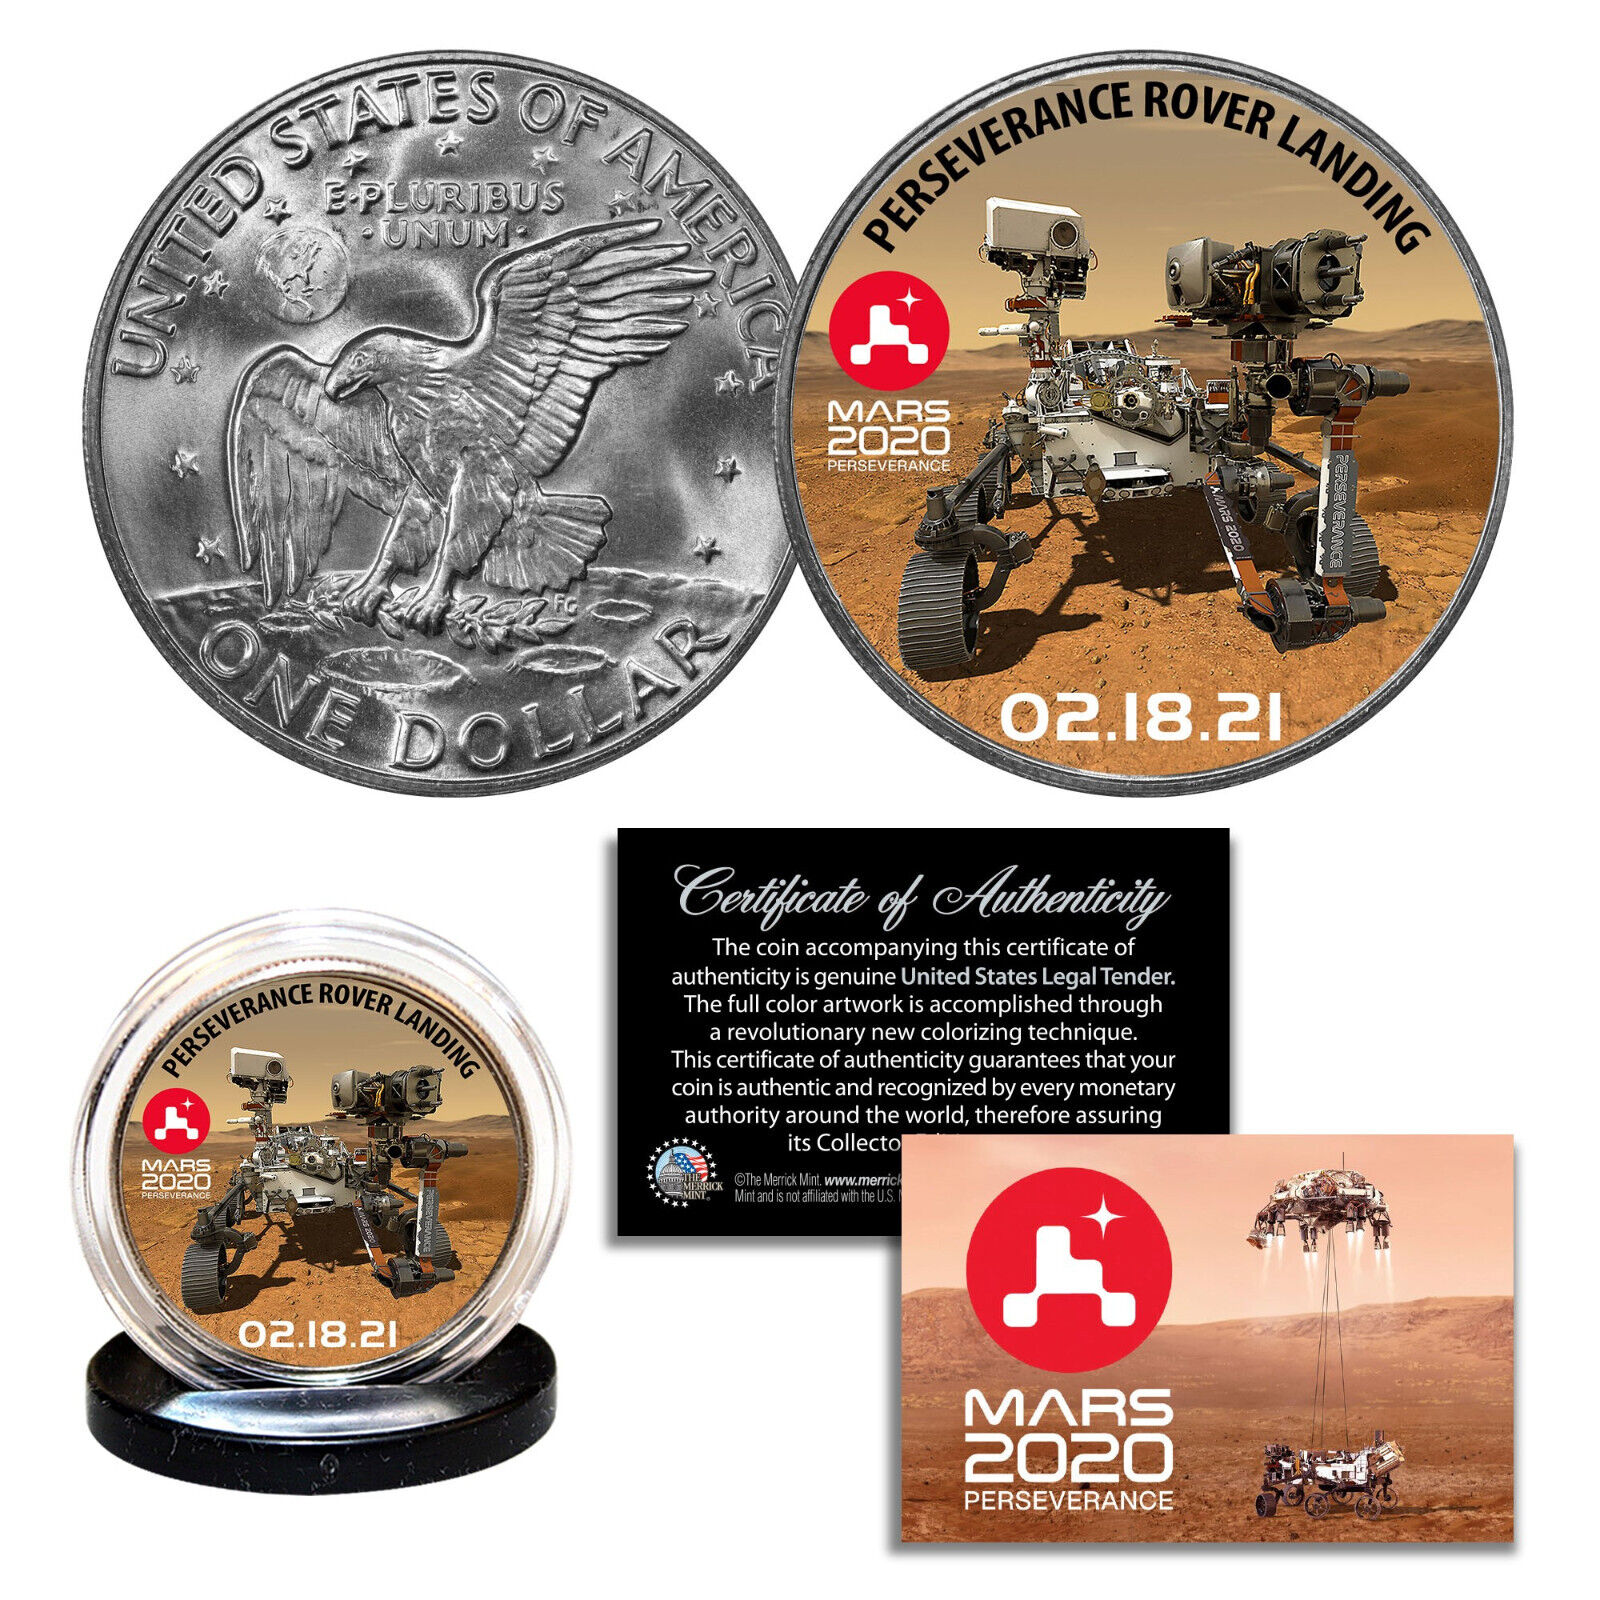 MARS 2020 PERSEVERANCE ROVER LANDING NASA Space Official IKE Eisenhower $1 Coin